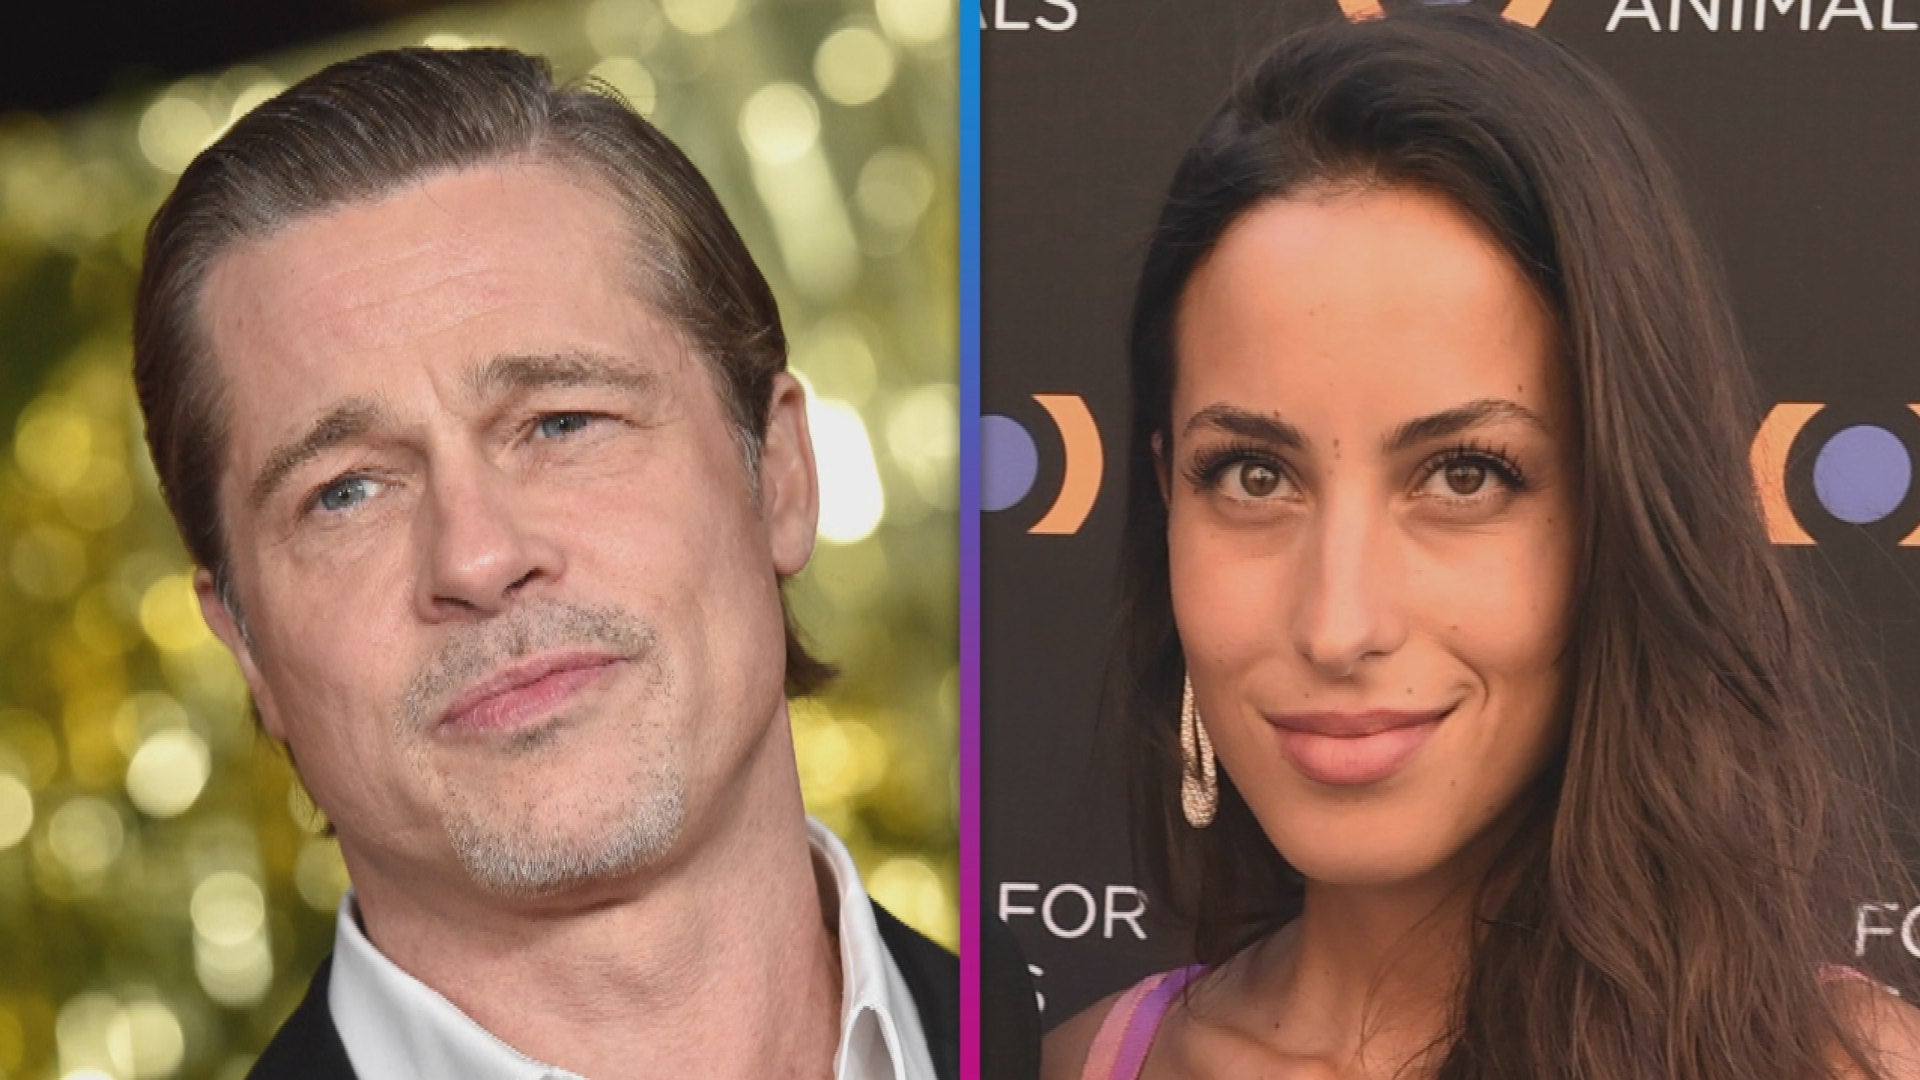 Brad Pitt and Ines de Ramon Are Dating and 'Having a Good Time